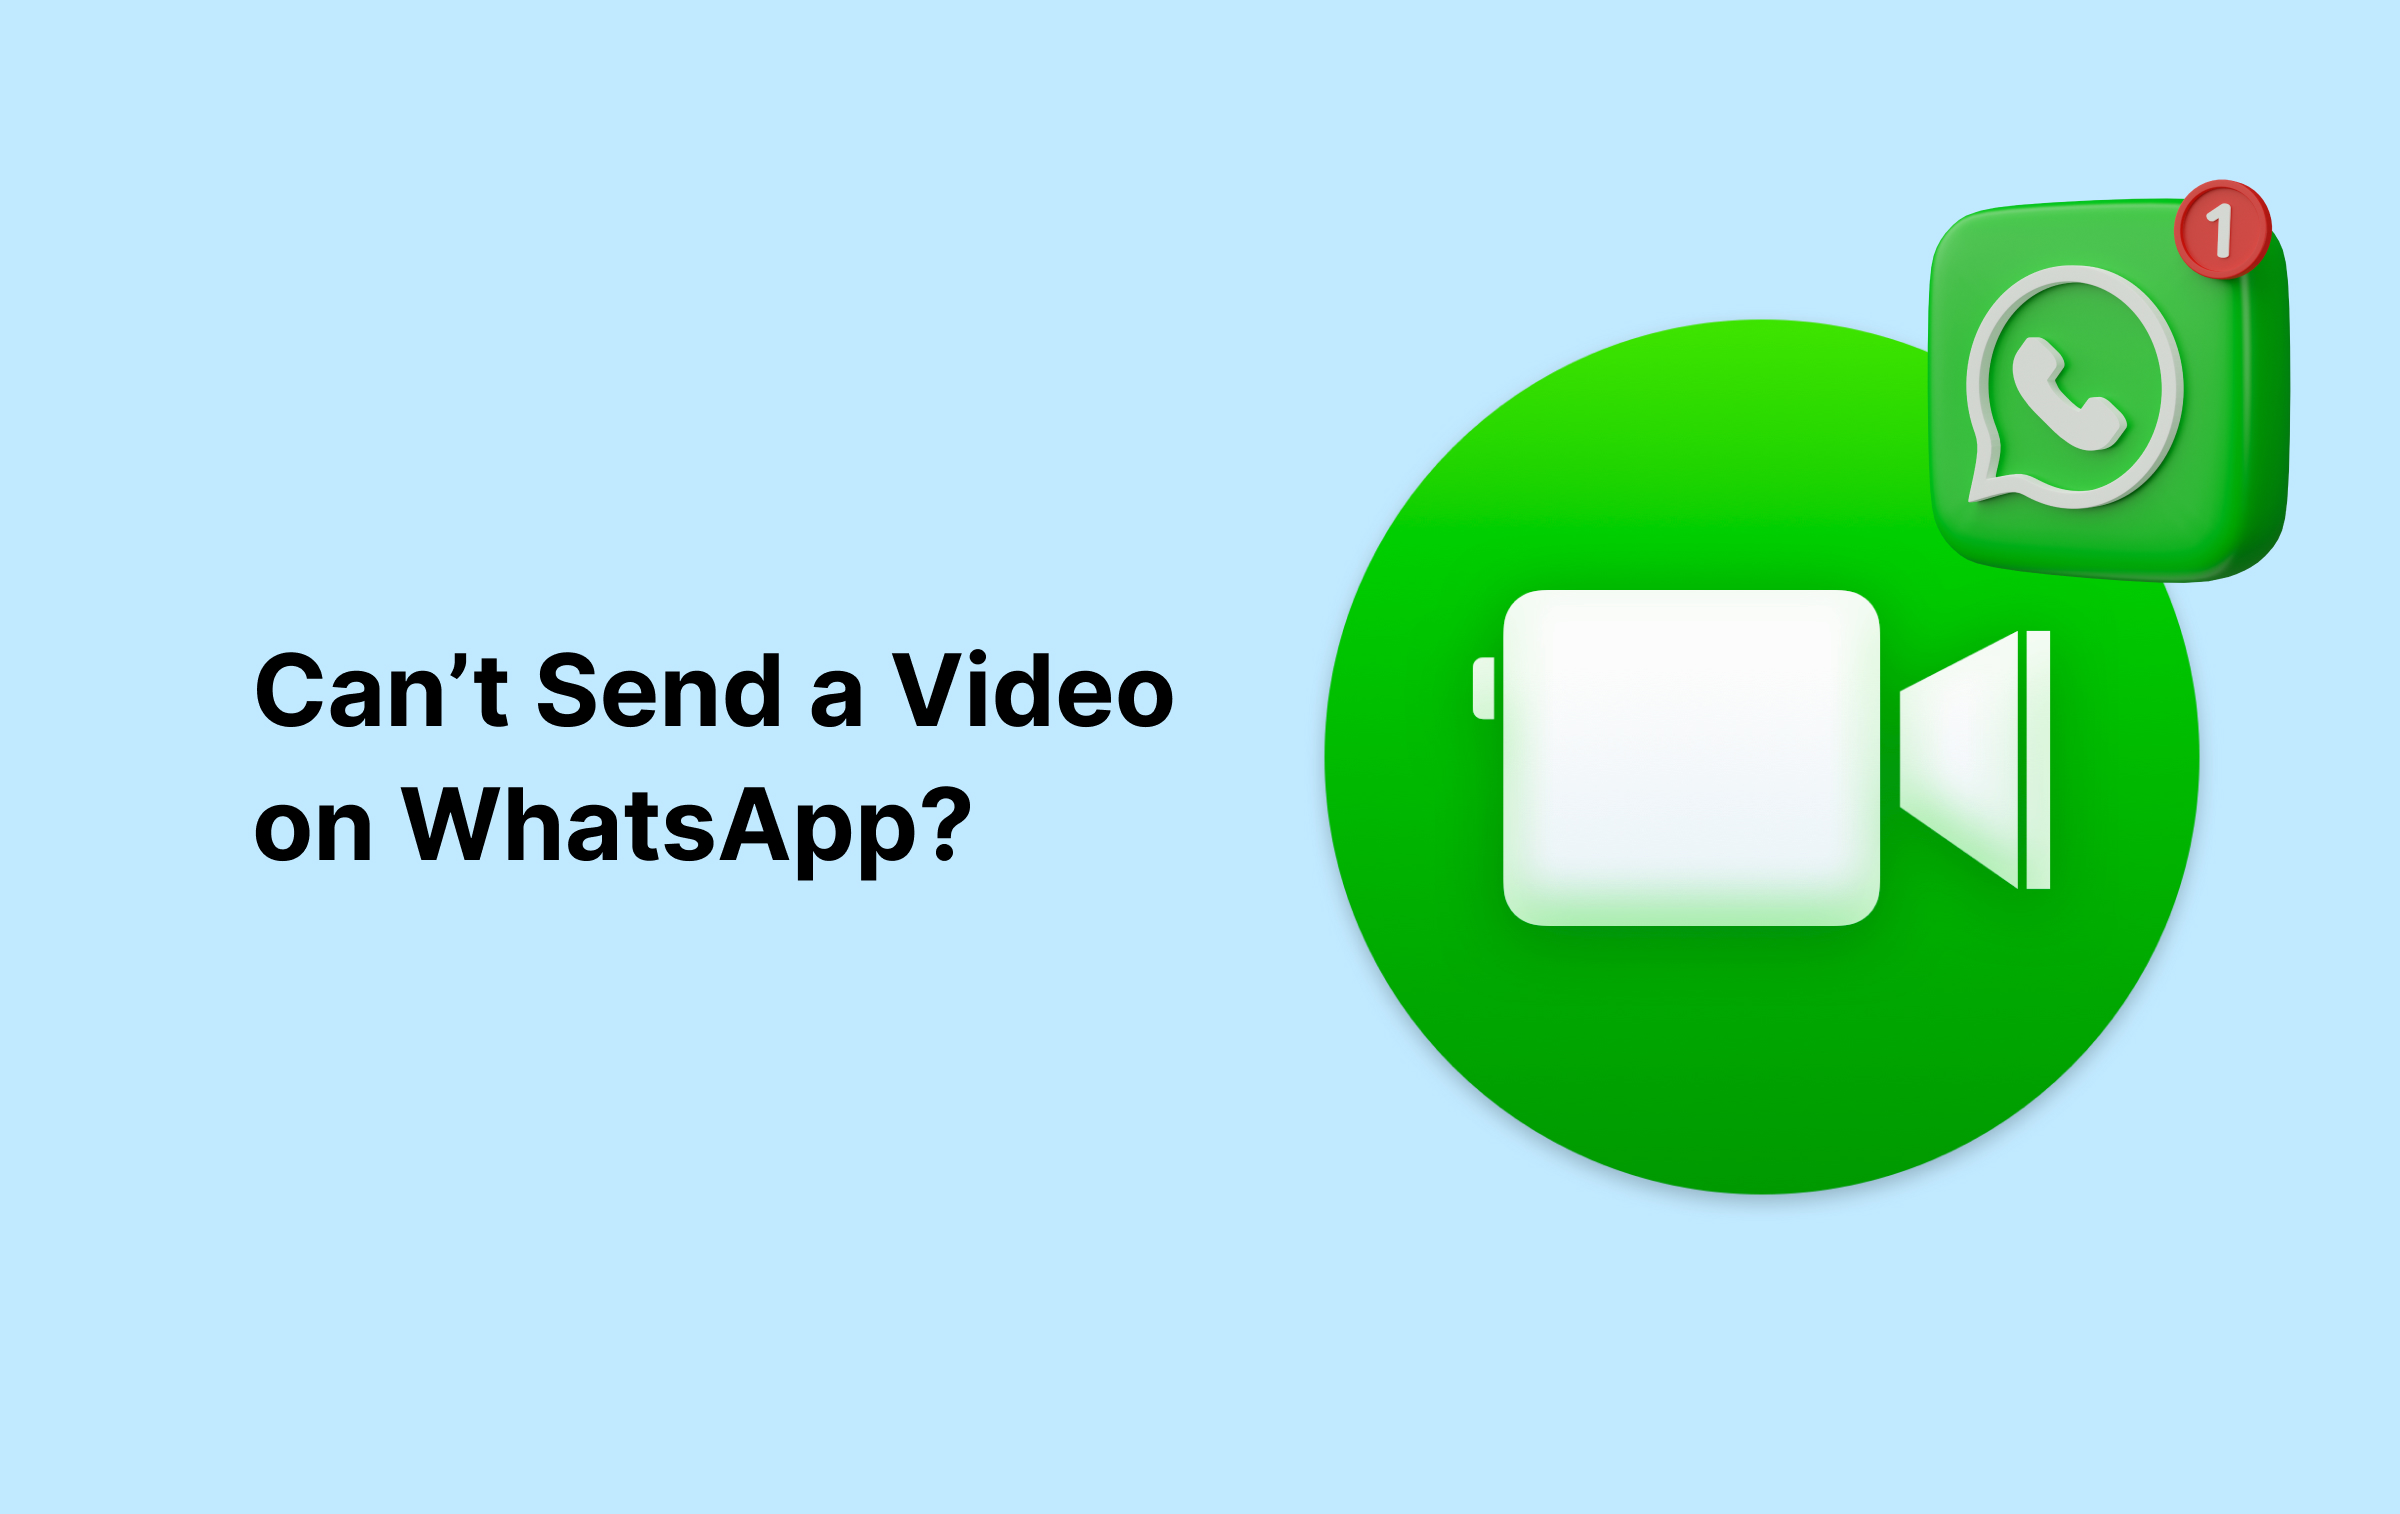 Can’t Send Video on WhatsApp? Try These Fixes